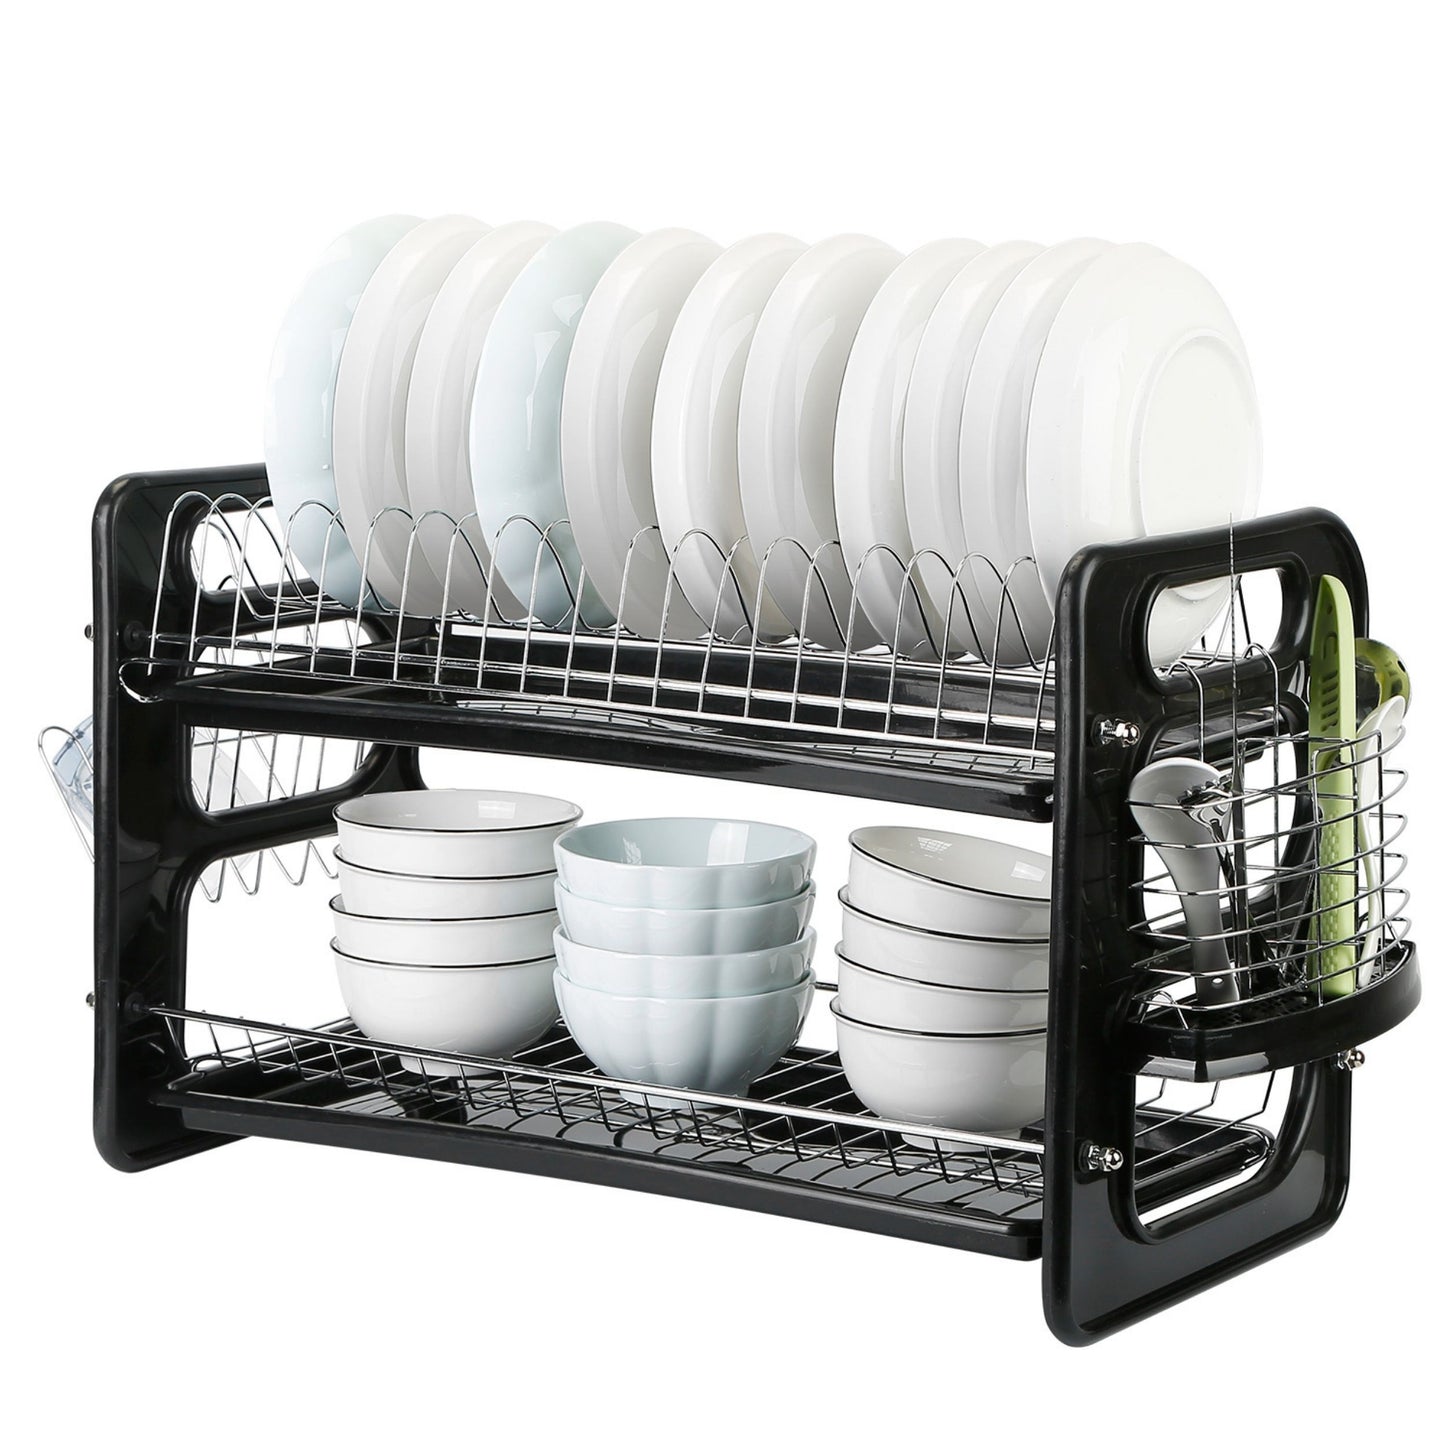 2-Tier Iron Drying Rack Set: Large Storage, Anti-Rust Drainer, Tableware & Cup Holder. Perfect for Kitchen Counter! - Black -